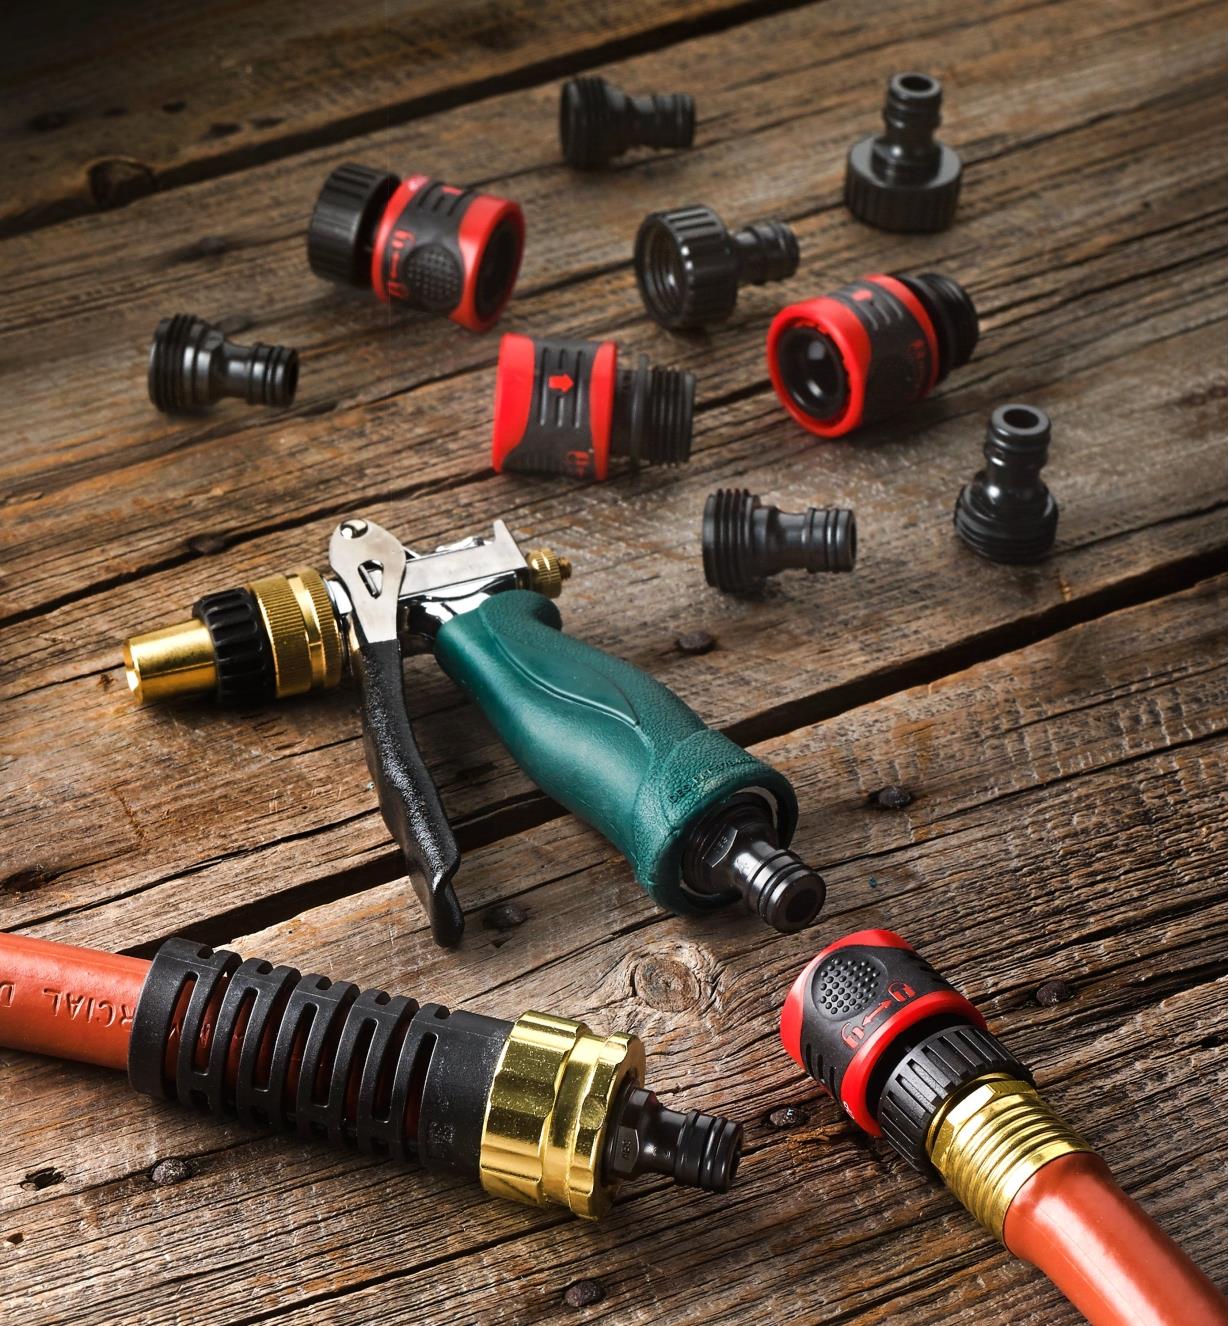 All components of the 12-piece quick-connect set shown with a sprayer and two ends of a garden hose